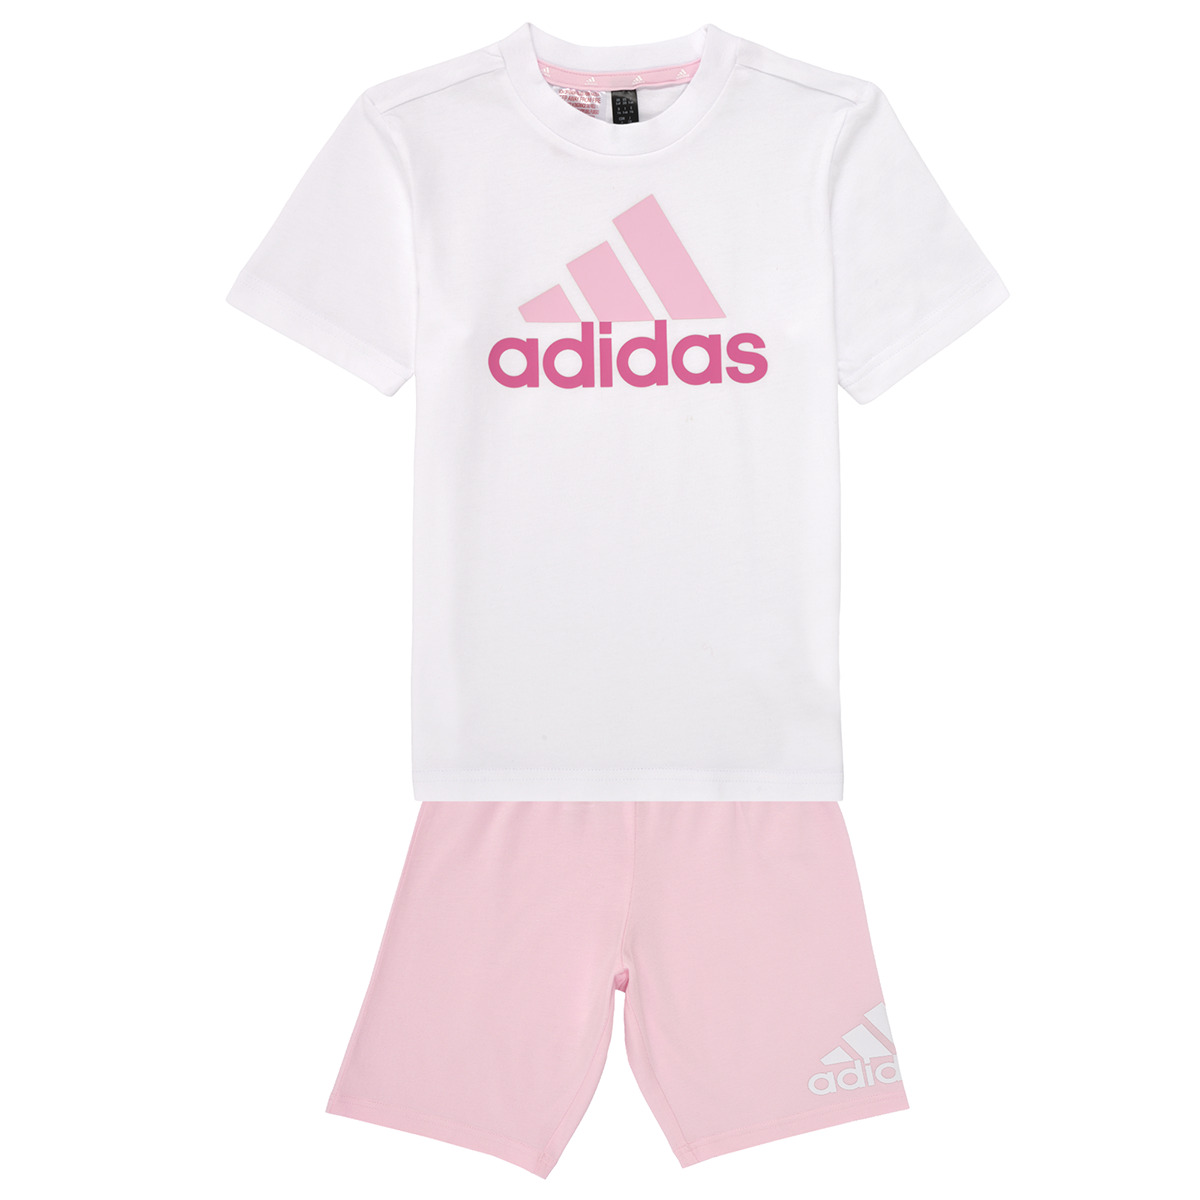 Clothing Girl Tracksuits Adidas Sportswear LK BL CO T SET Pink / White